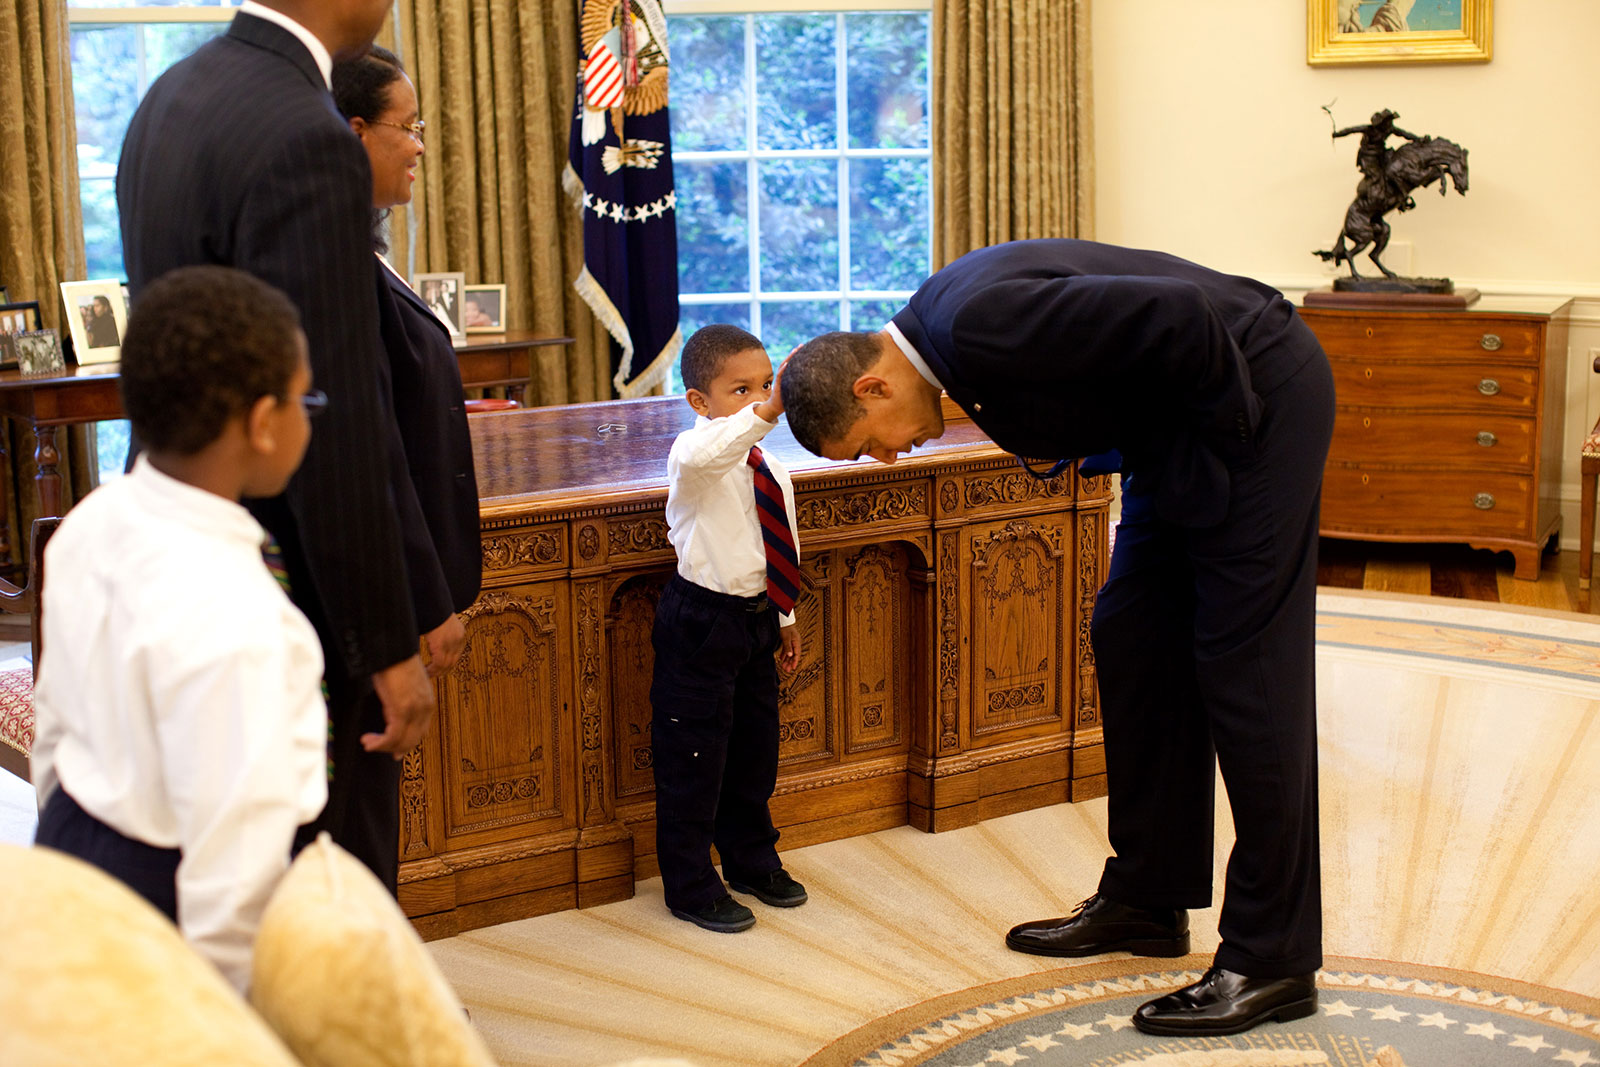 Jacob Philadelphia touches the hair of Barack Obama to see what it feels like. 2009